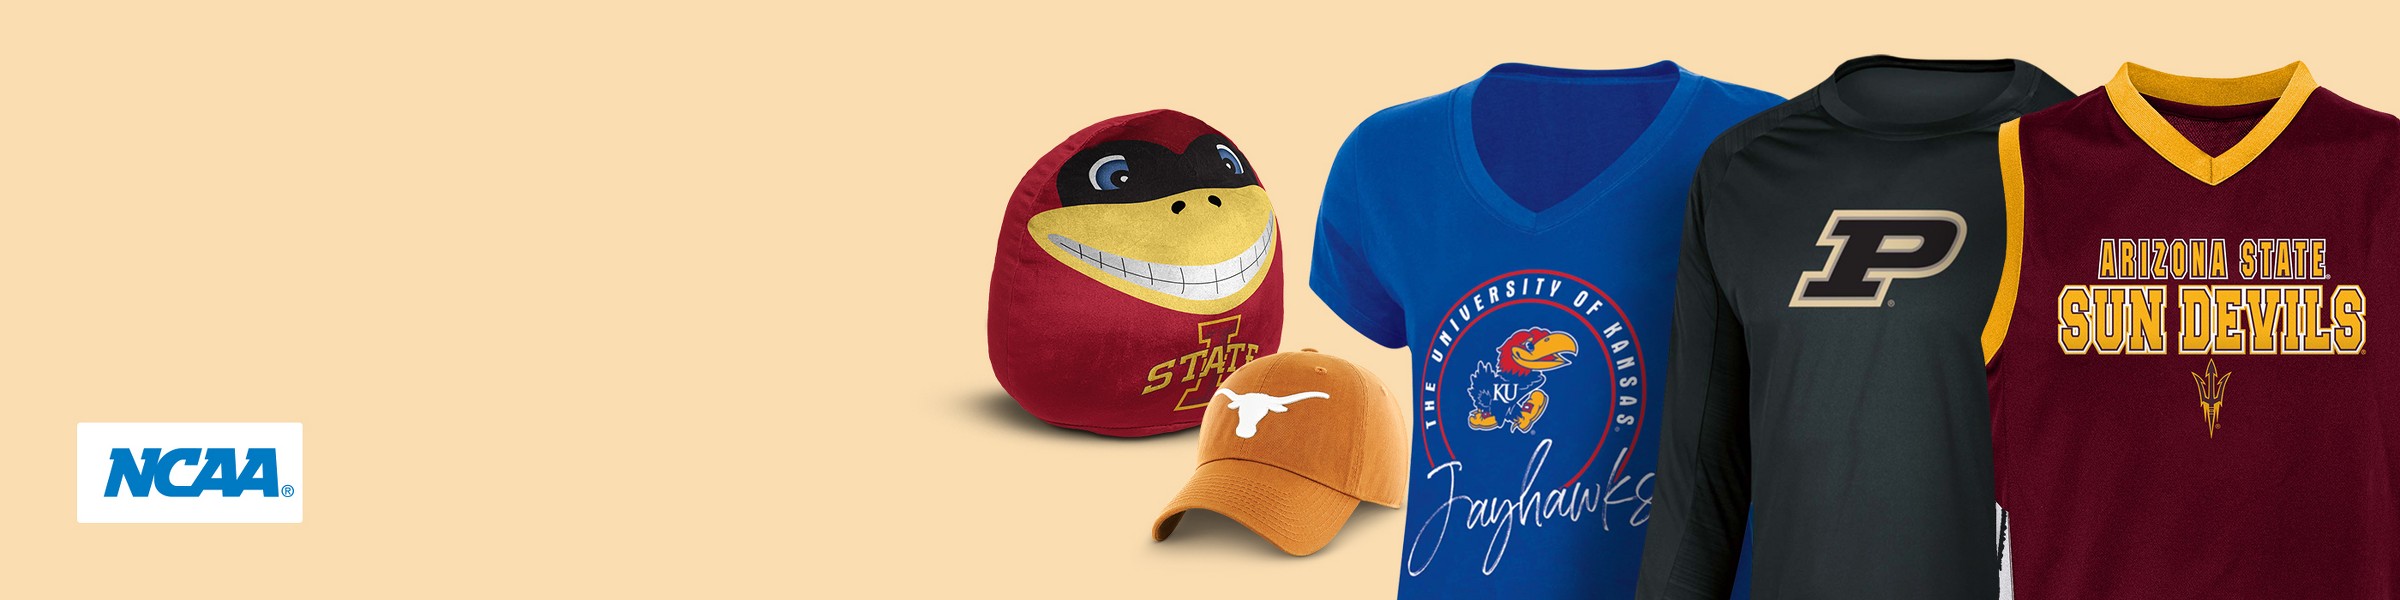 Get set for the tournament. Watch the slam dunks with official team gear. NCAA